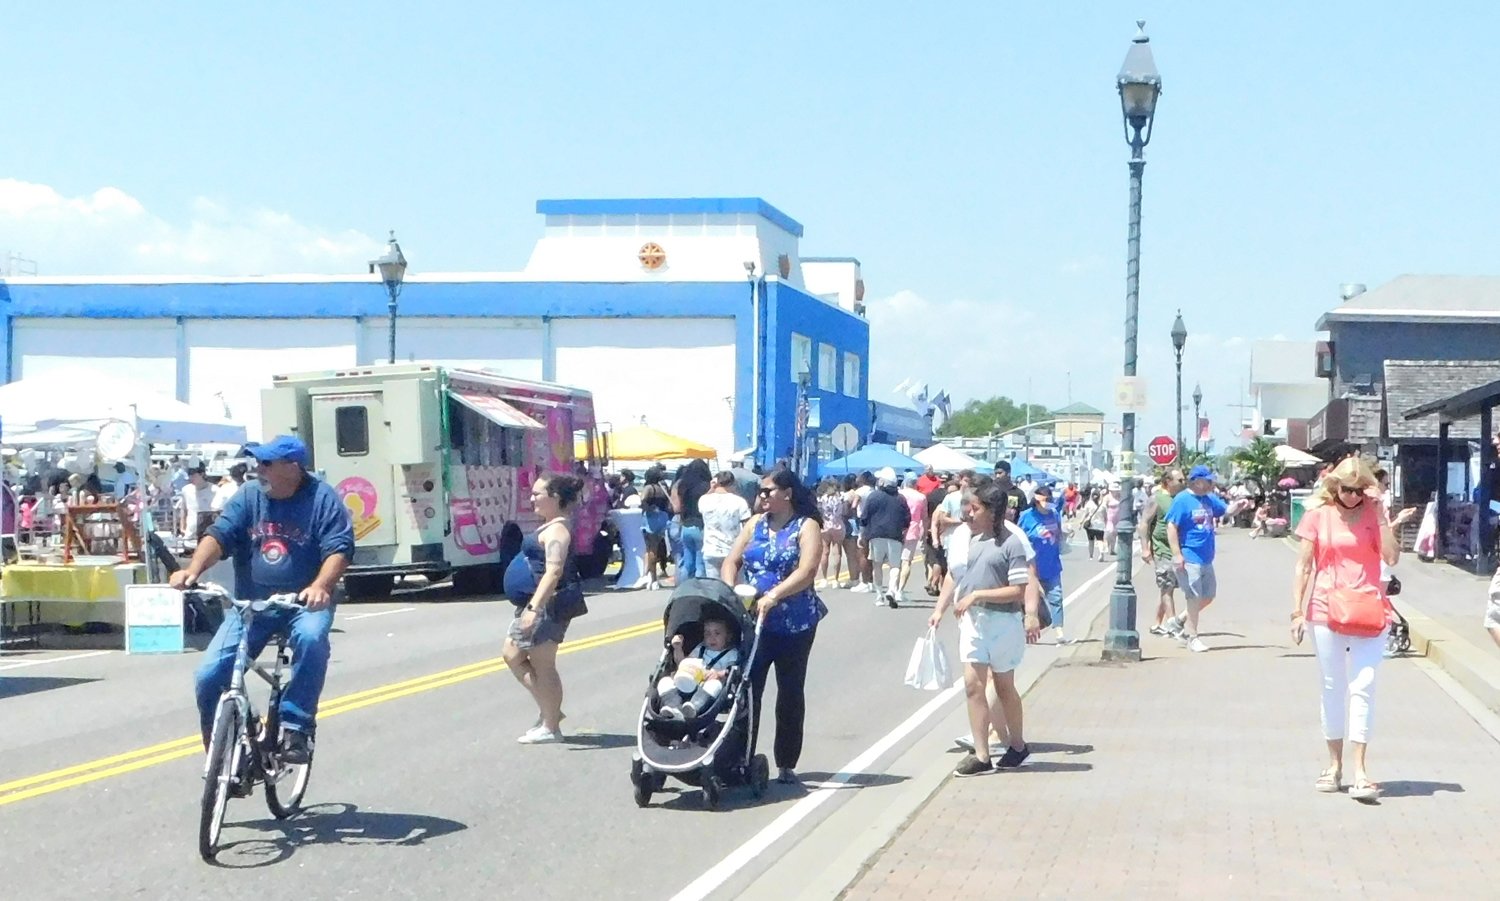 Gentle sun and sunny breezes encouraged Freeporters to come out for the 32nd Annual Nautical Mile Festival on June 4.